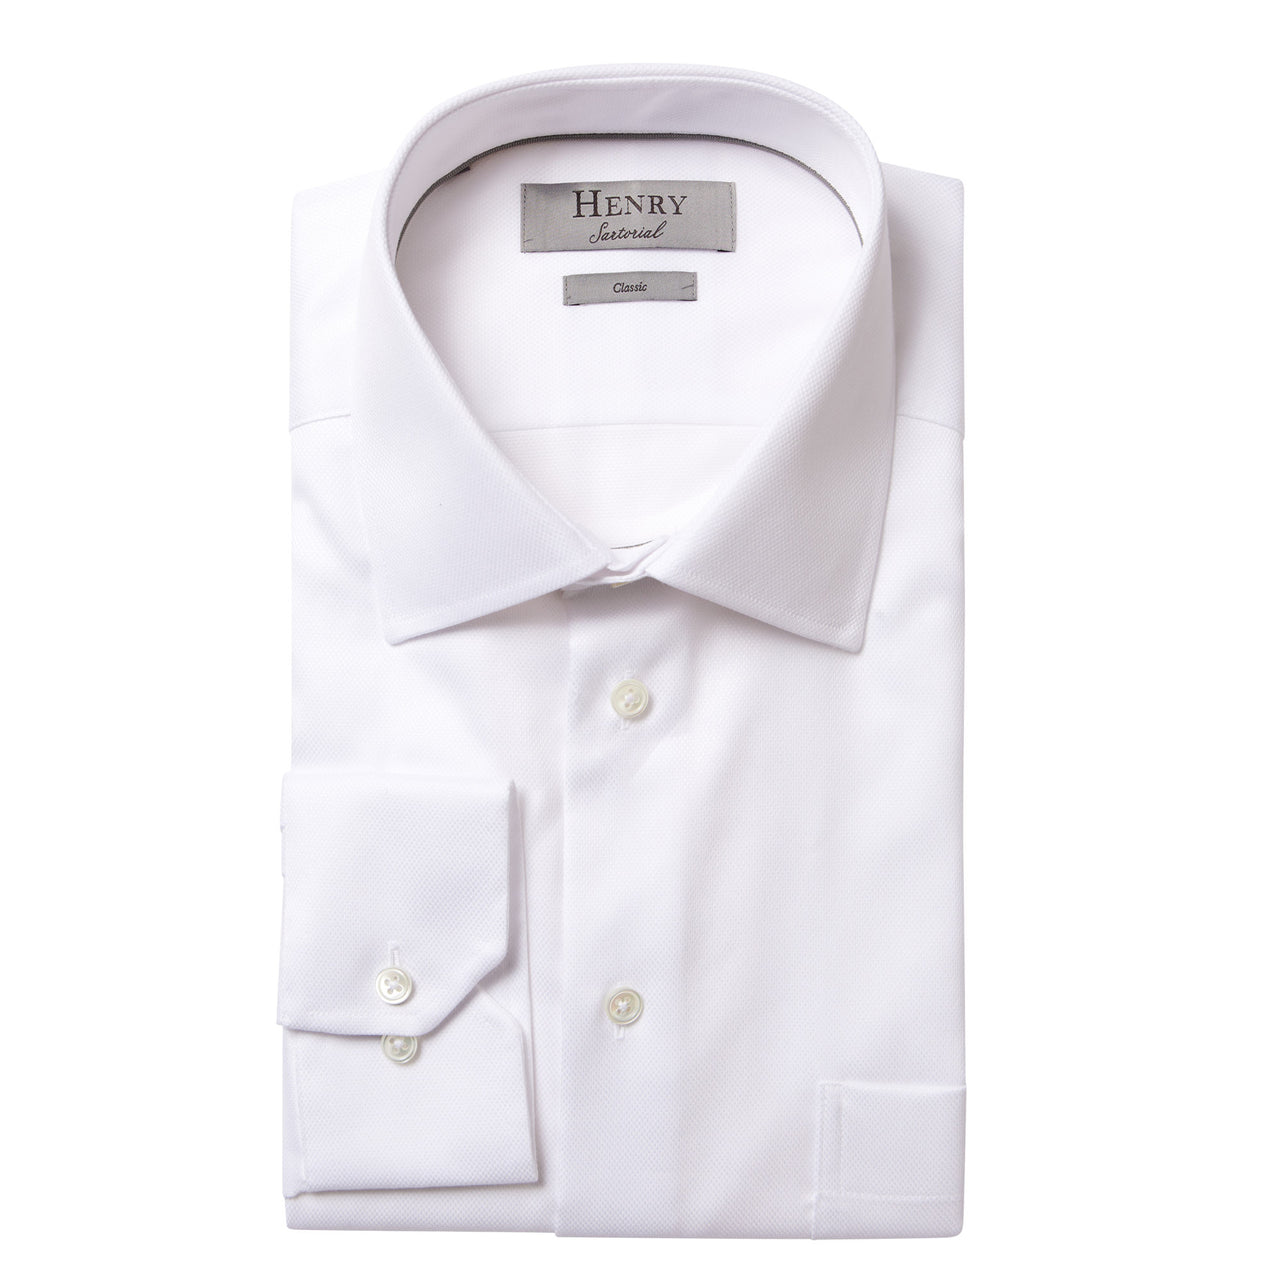 HENRY SARTORIAL Classic Fit Oxford Shirt WHITE